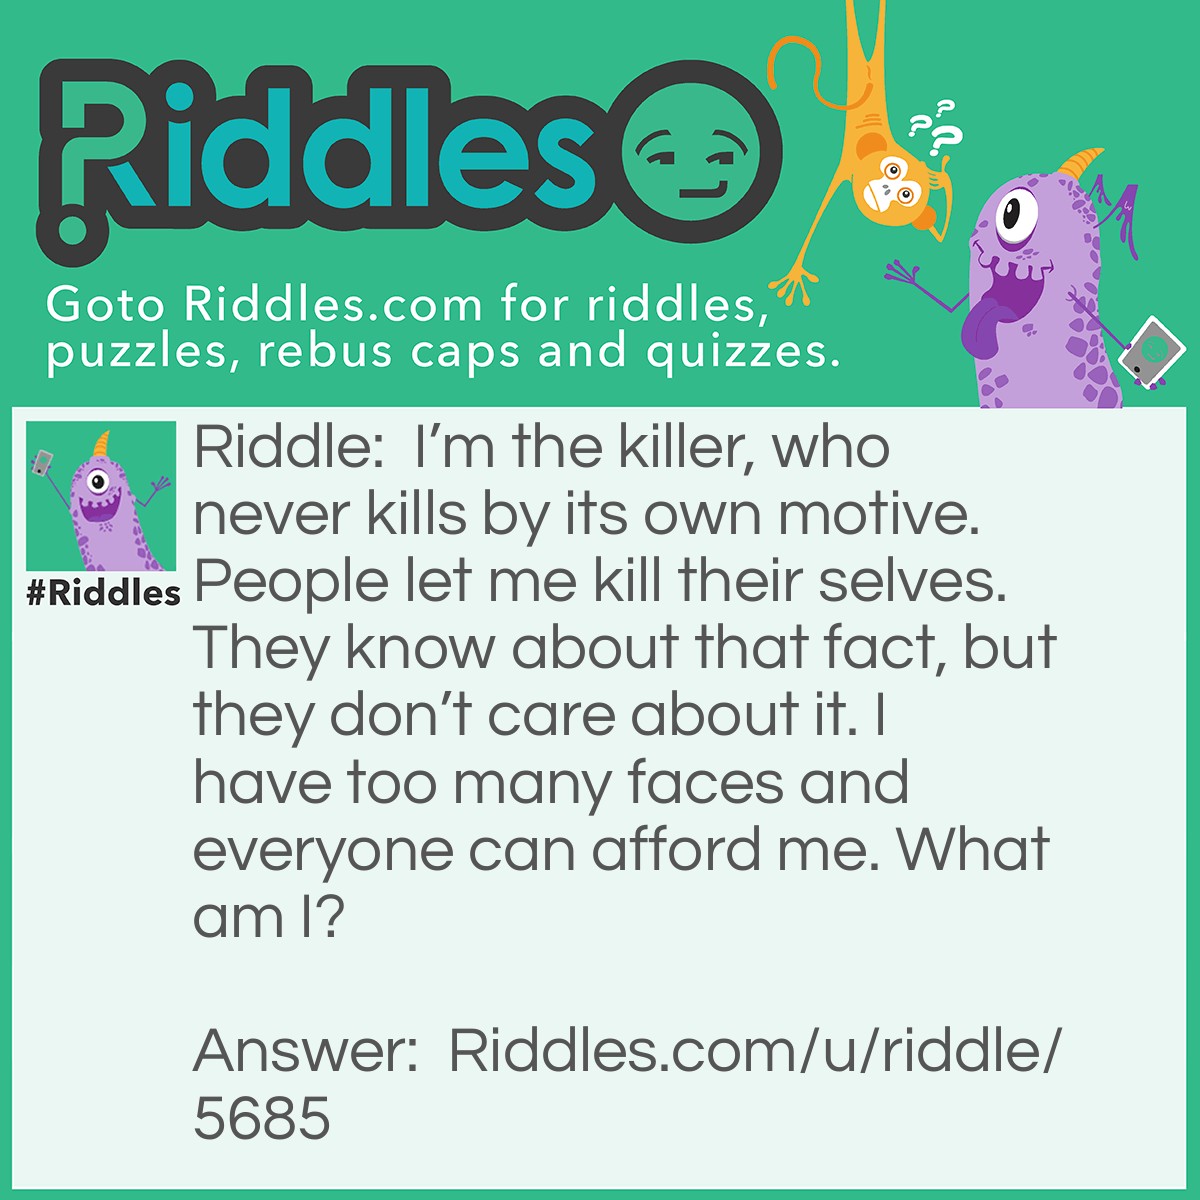 Riddle: I'm the killer, who never kills by its own motive. People let me kill their selves. They know about that fact, but they don't care about it. I have too many faces and everyone can afford me. What am I? Answer: Narcotic / Drug.